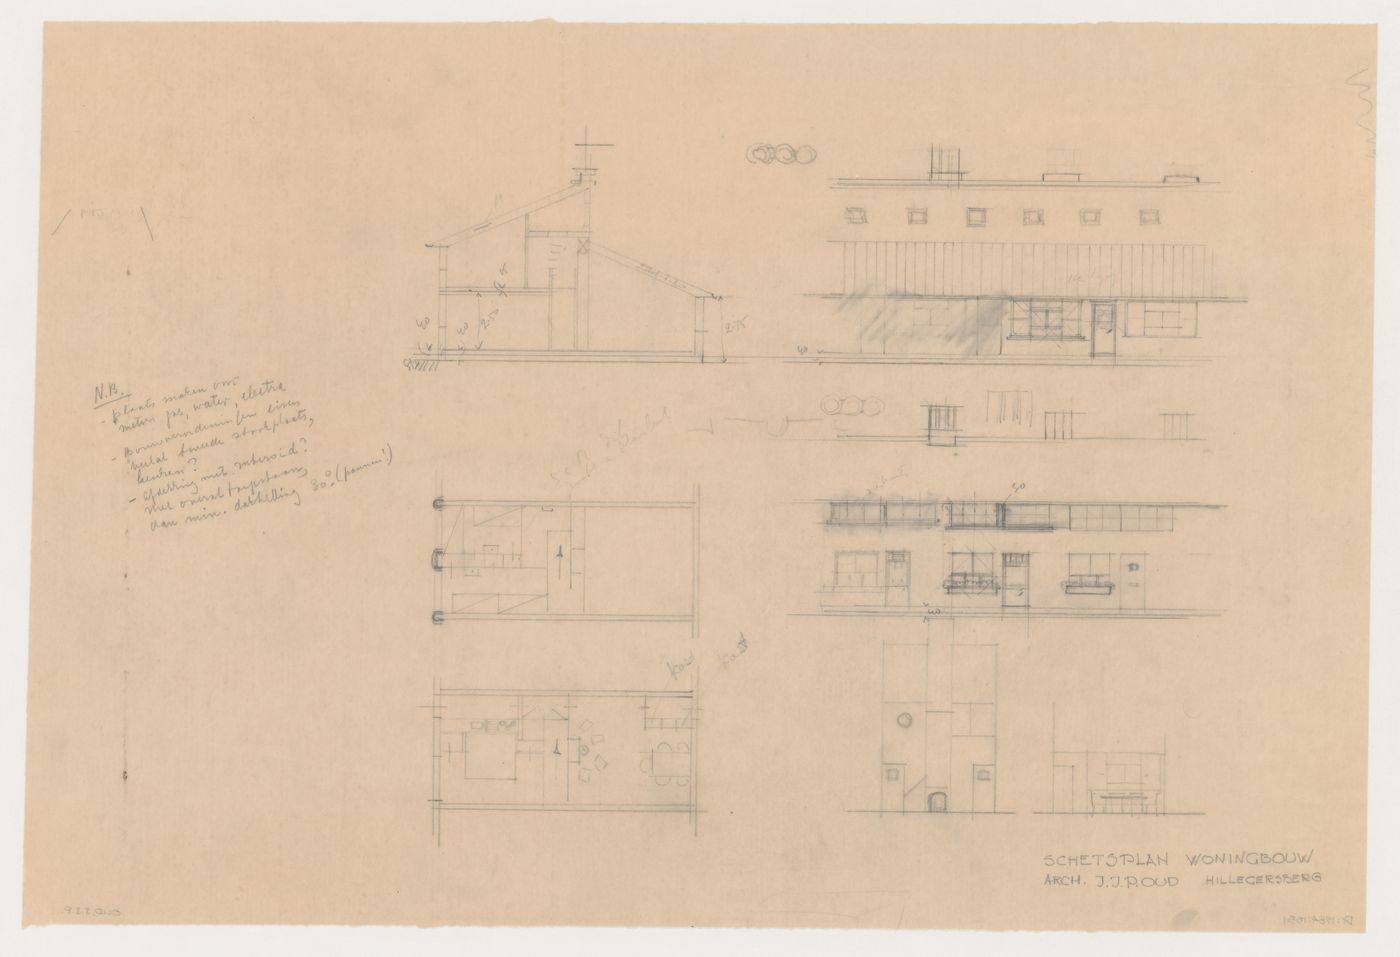 Plans, section, partial sections, and elevations for a house/studio, Hillegersberg, Netherlands